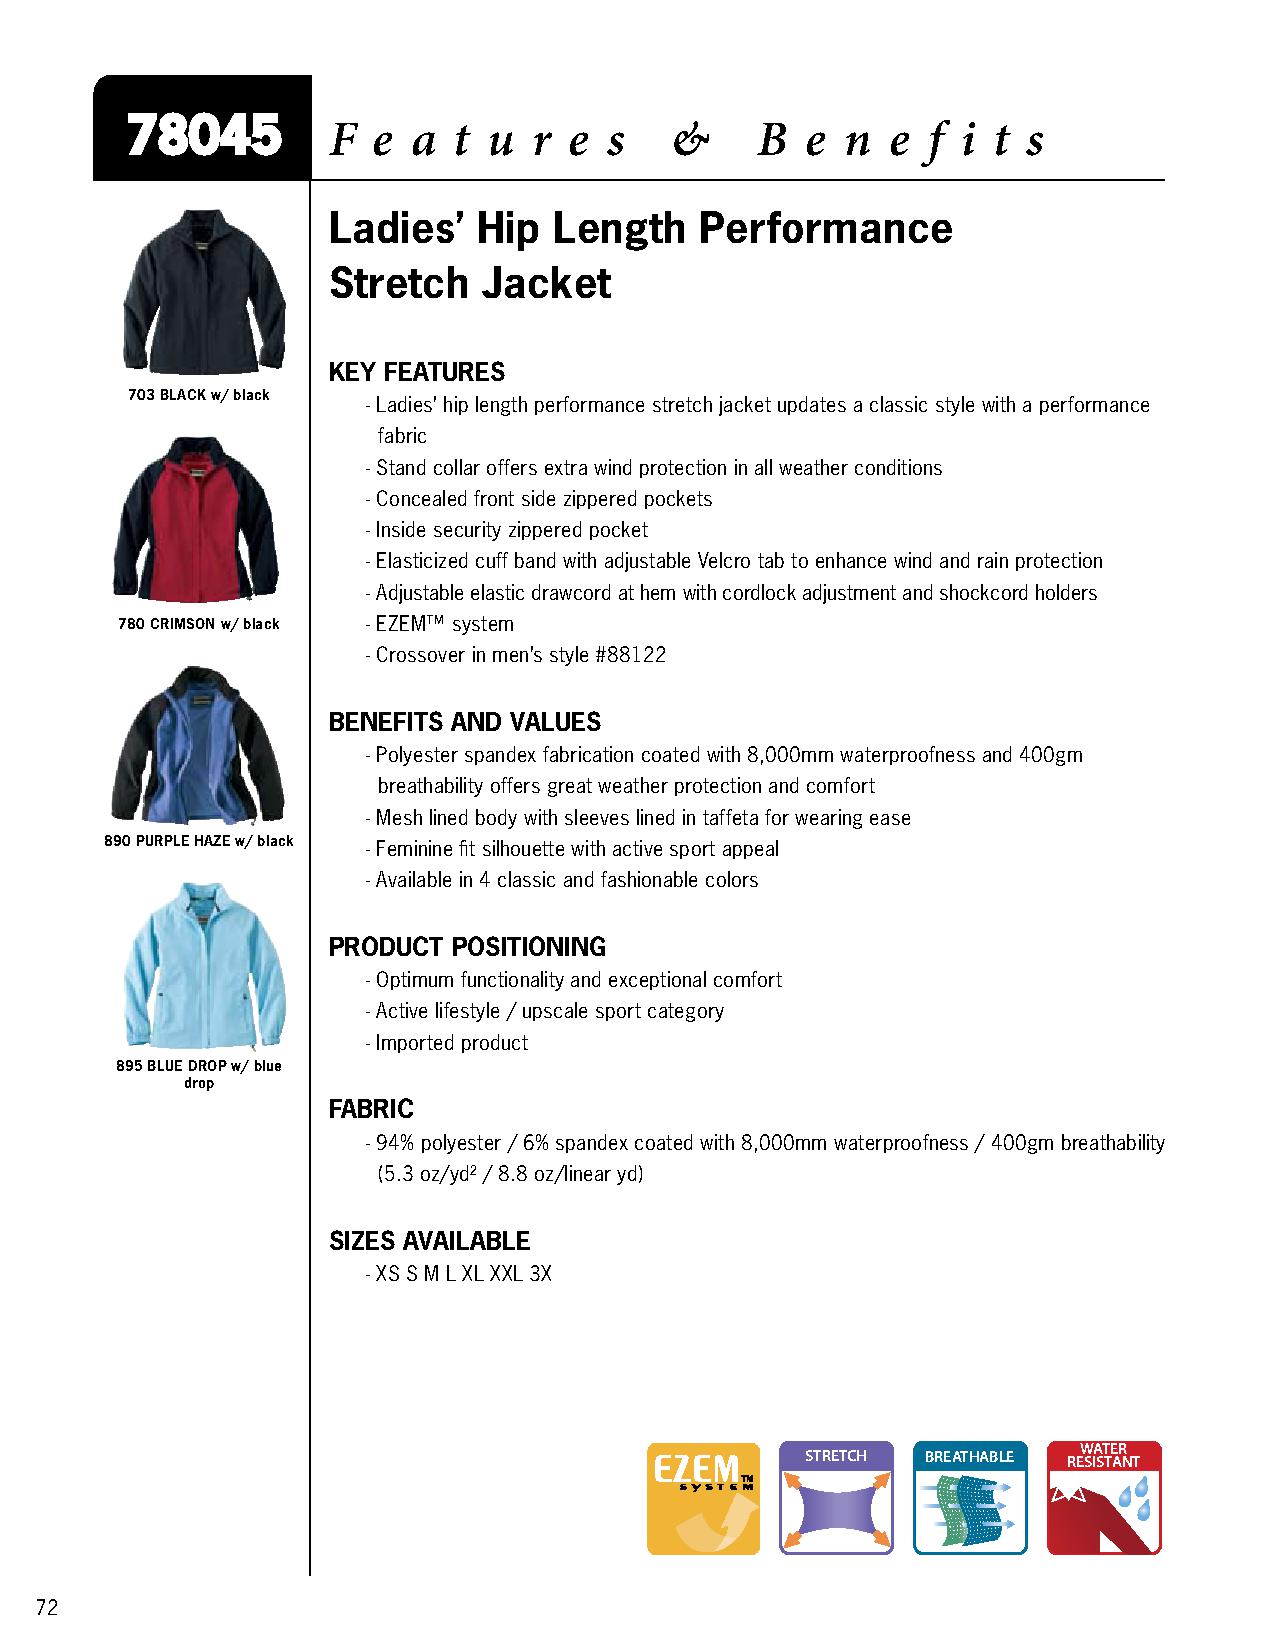 Ash City Lightweight 78045 - Ladies' Hip Length Perforamnce Stretch Jacket